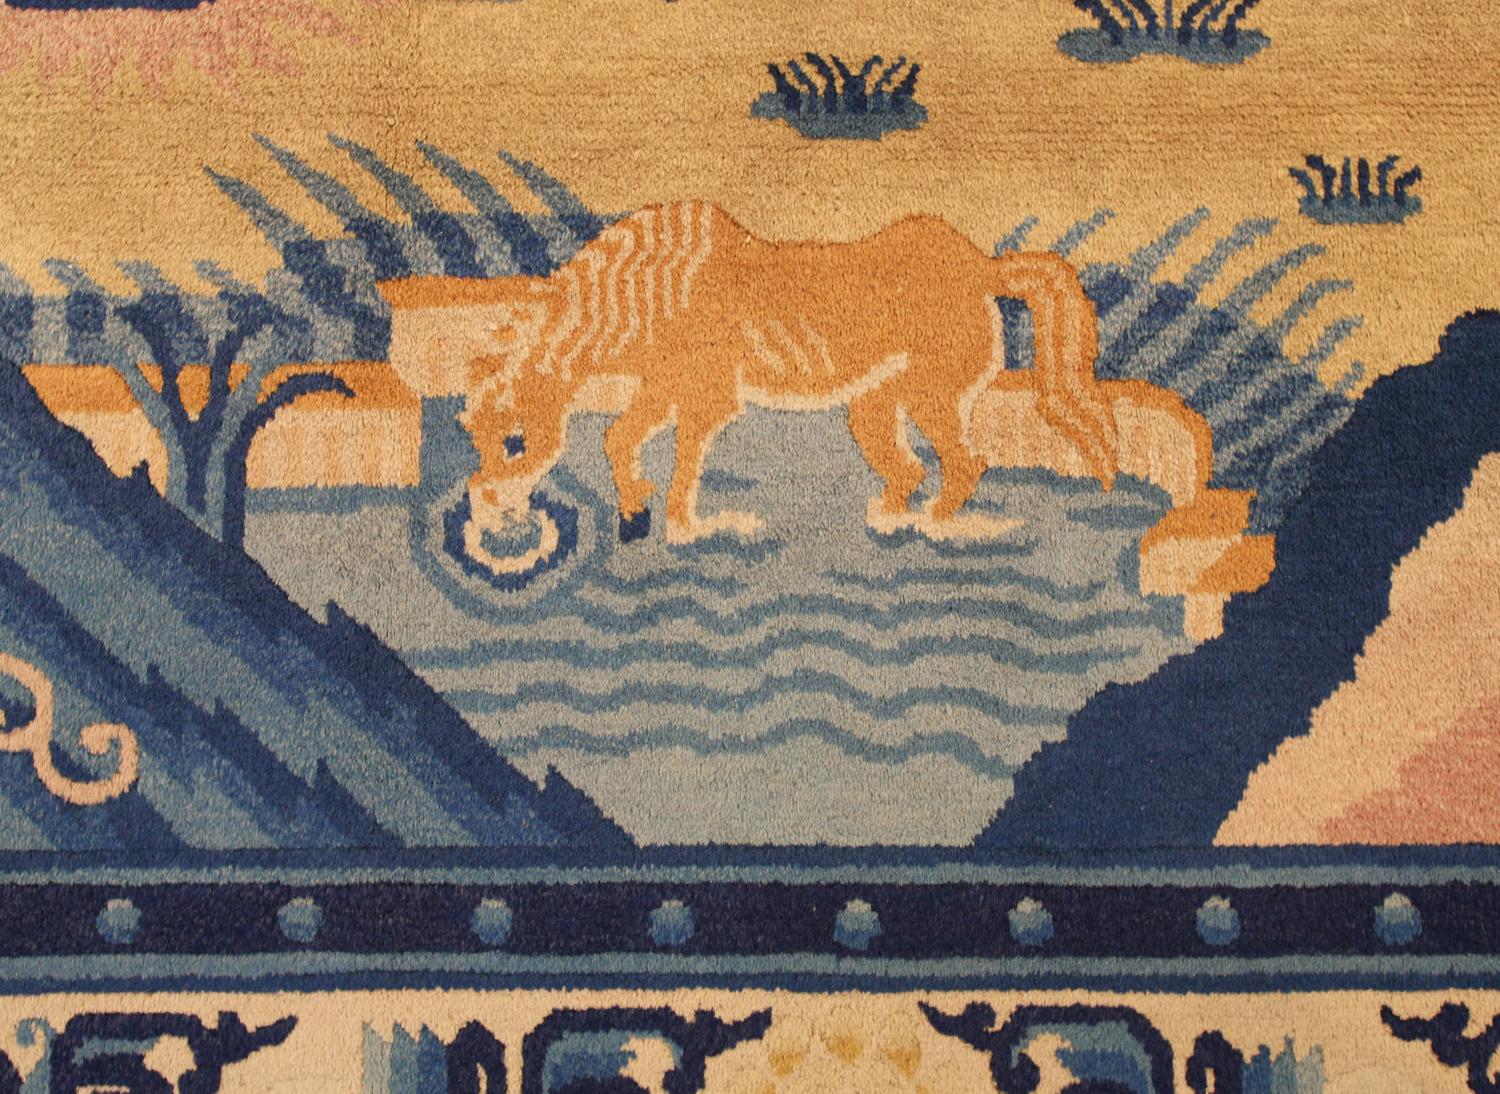 This unique carpet illustrates horses running freely in beautiful fields. In Chinese culture, the horse has consistently been used as a symbol of strength, beauty and freedom.
A wonderful figurative design and a very attractive color palette that